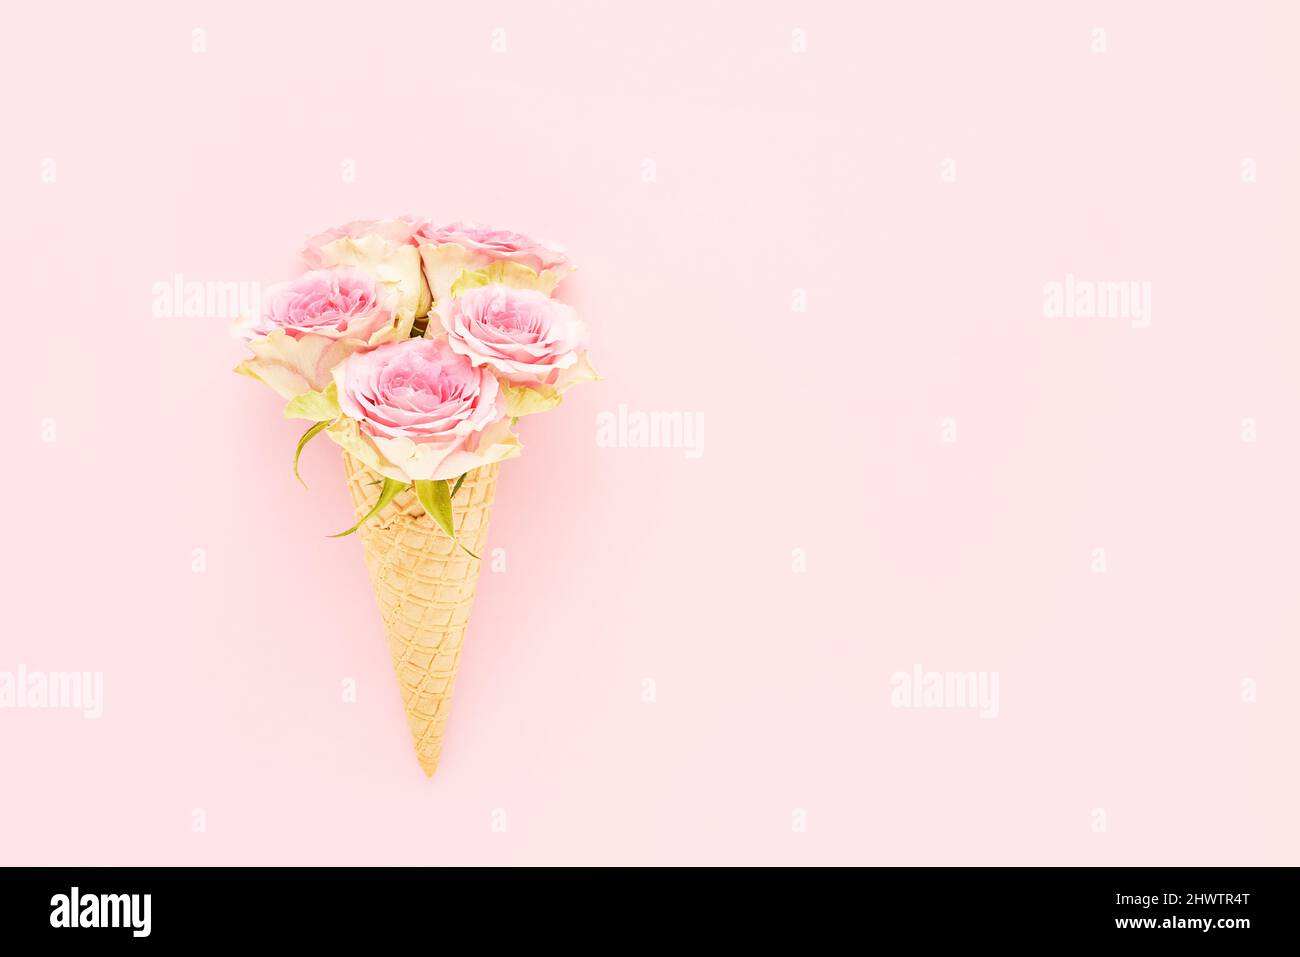 Pink roses in a waffle ice cream cone on a pink background. Mothers Day, Valentines Day, bachelorette, summer concept. Copy space, top view Stock Photo